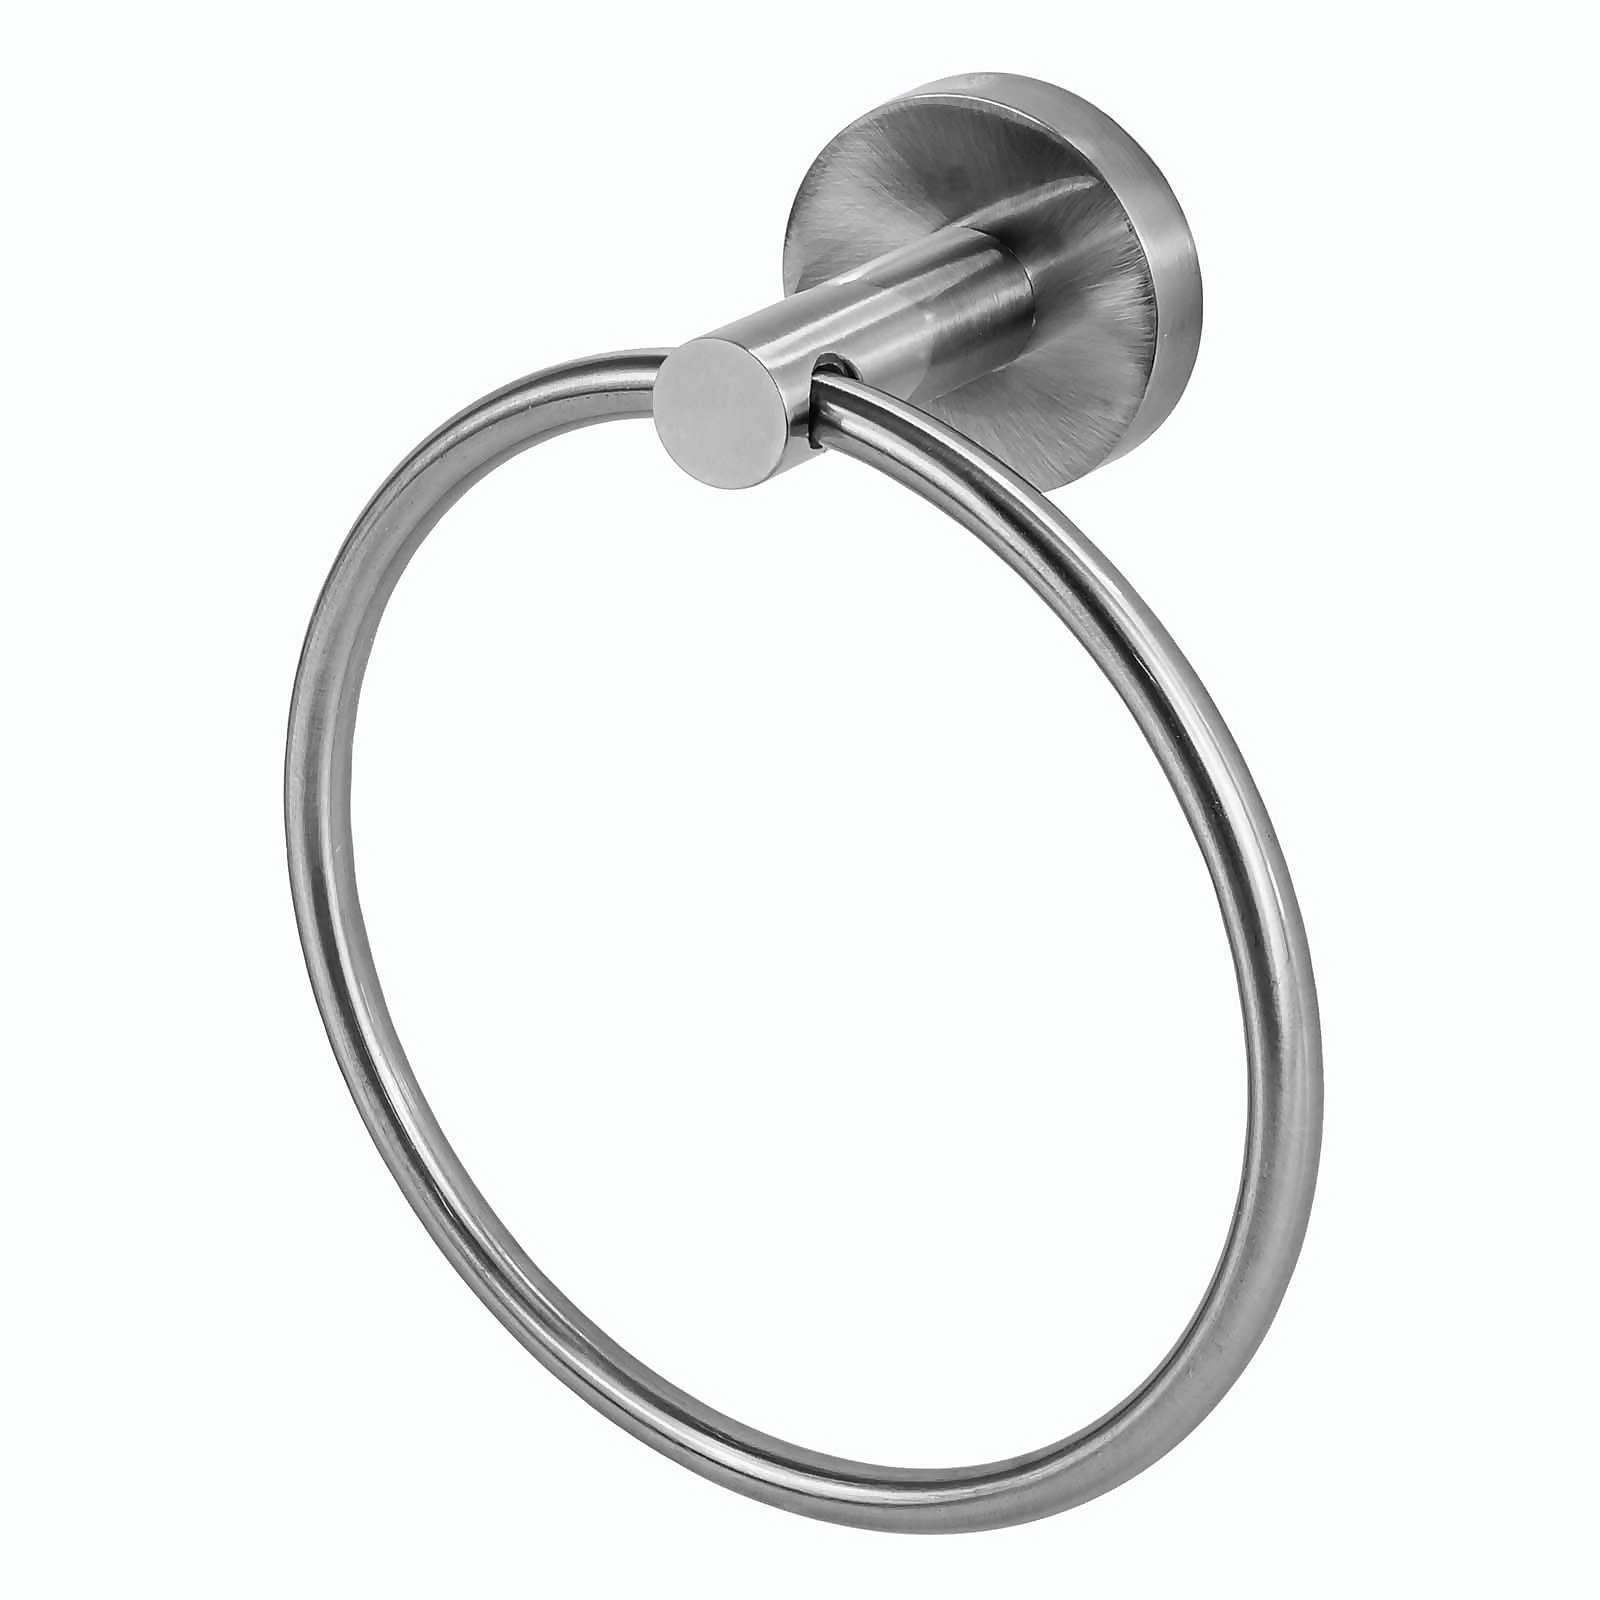 Photo of Self Adhesive Towel Ring - Stainless Steel